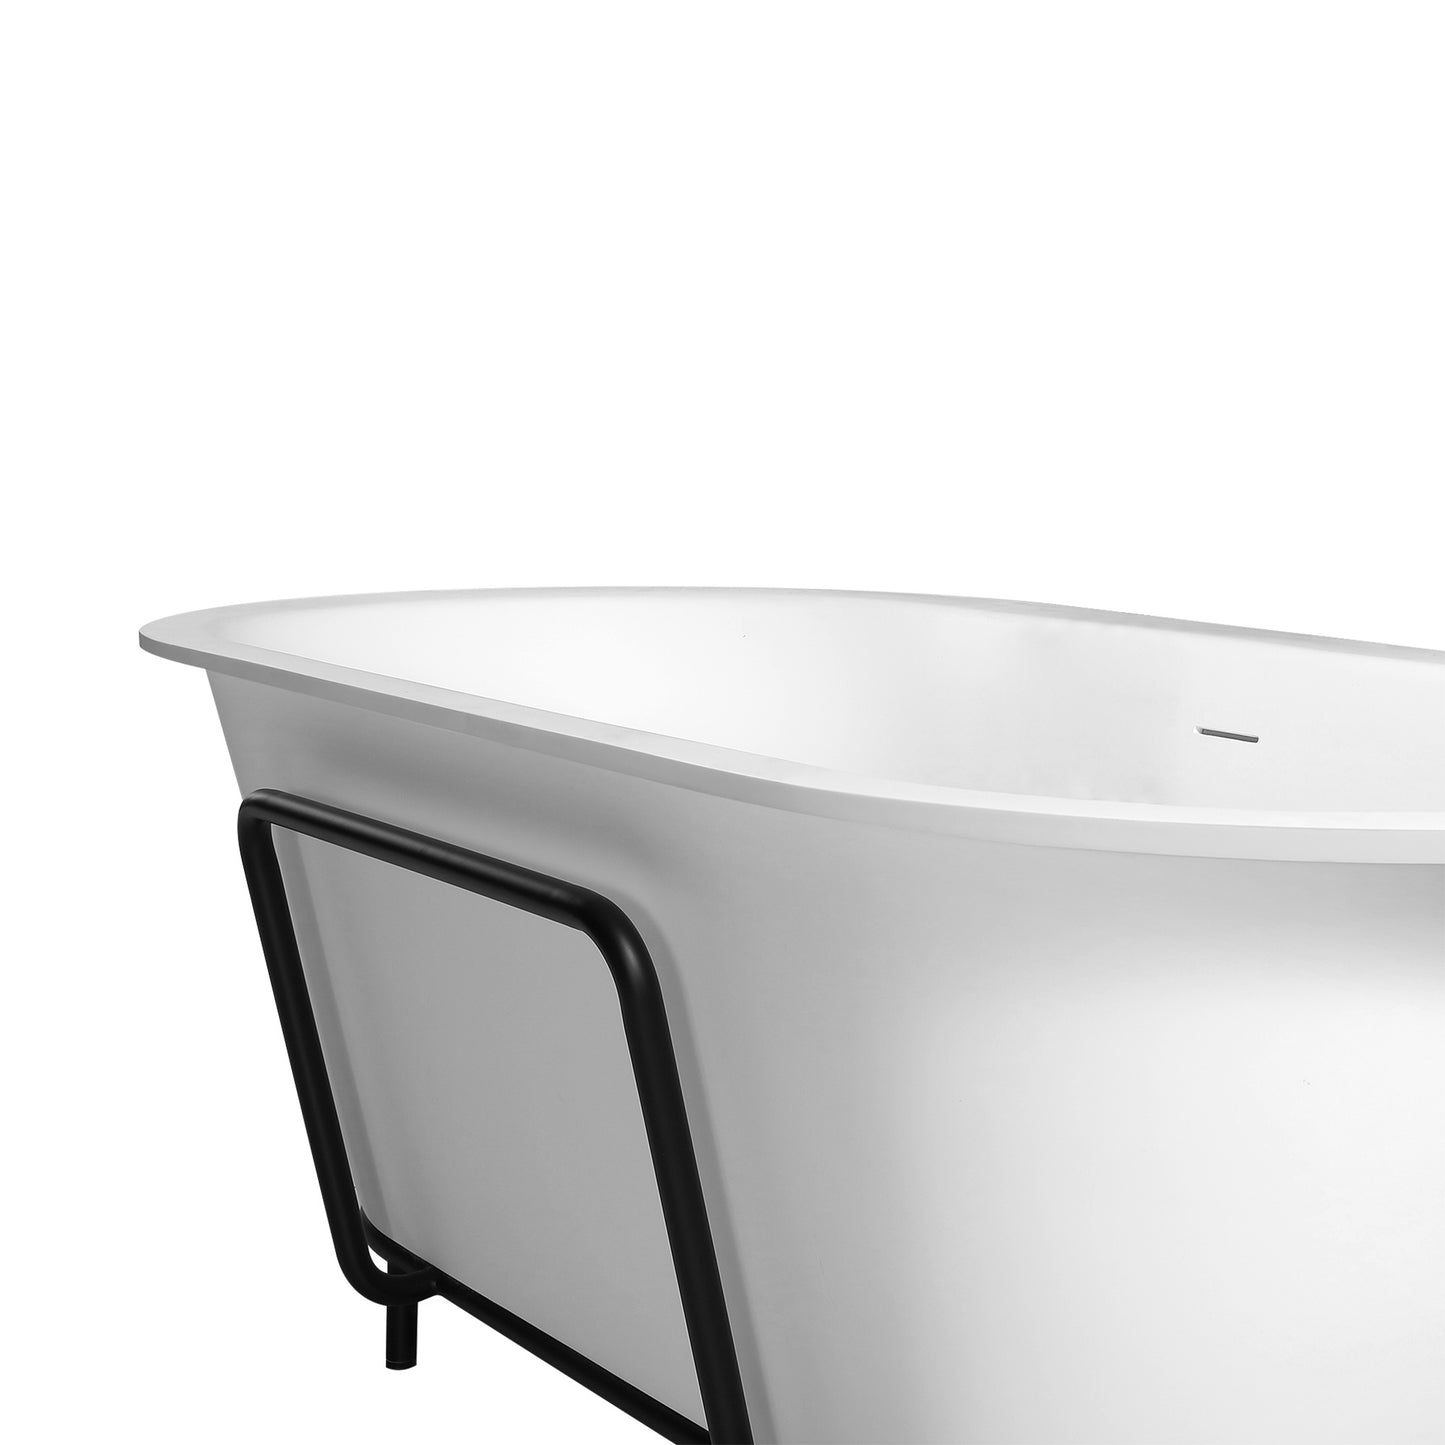 71 inch freestanding artificial stone solid surface bathtub